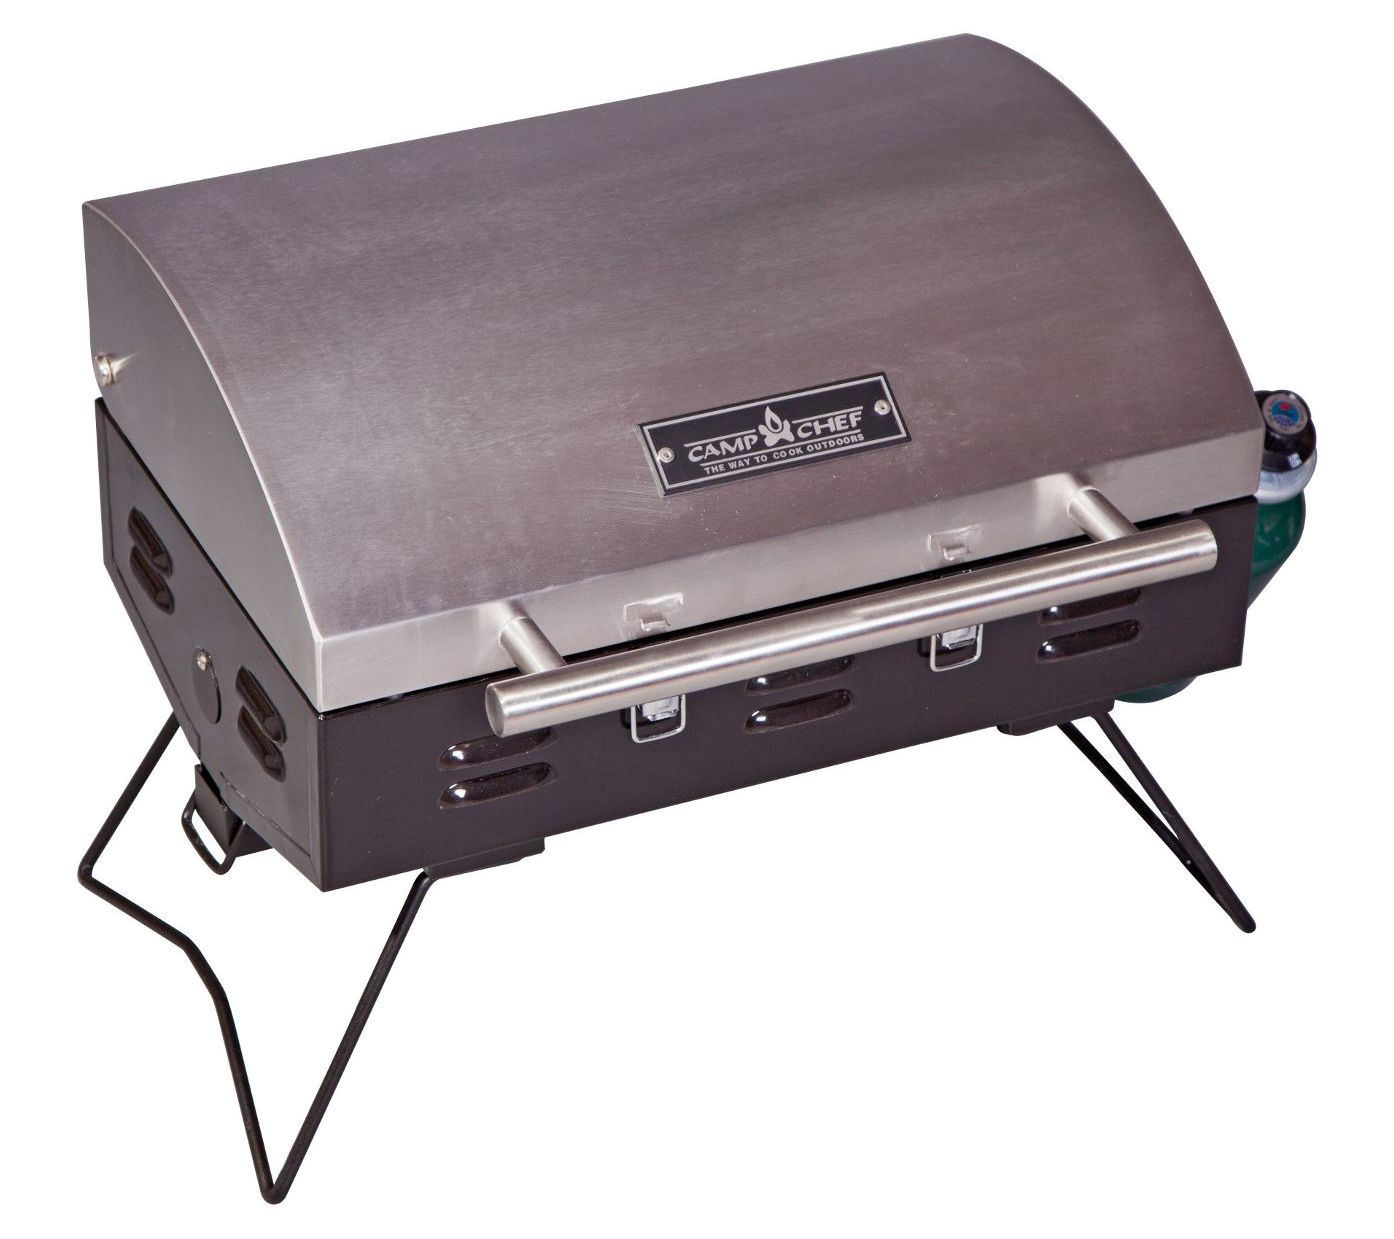 Camp Chef Stainless Steel Tabletop Grill - QVC.com Camp Chef Stainless Steel Portable Bbq Grill